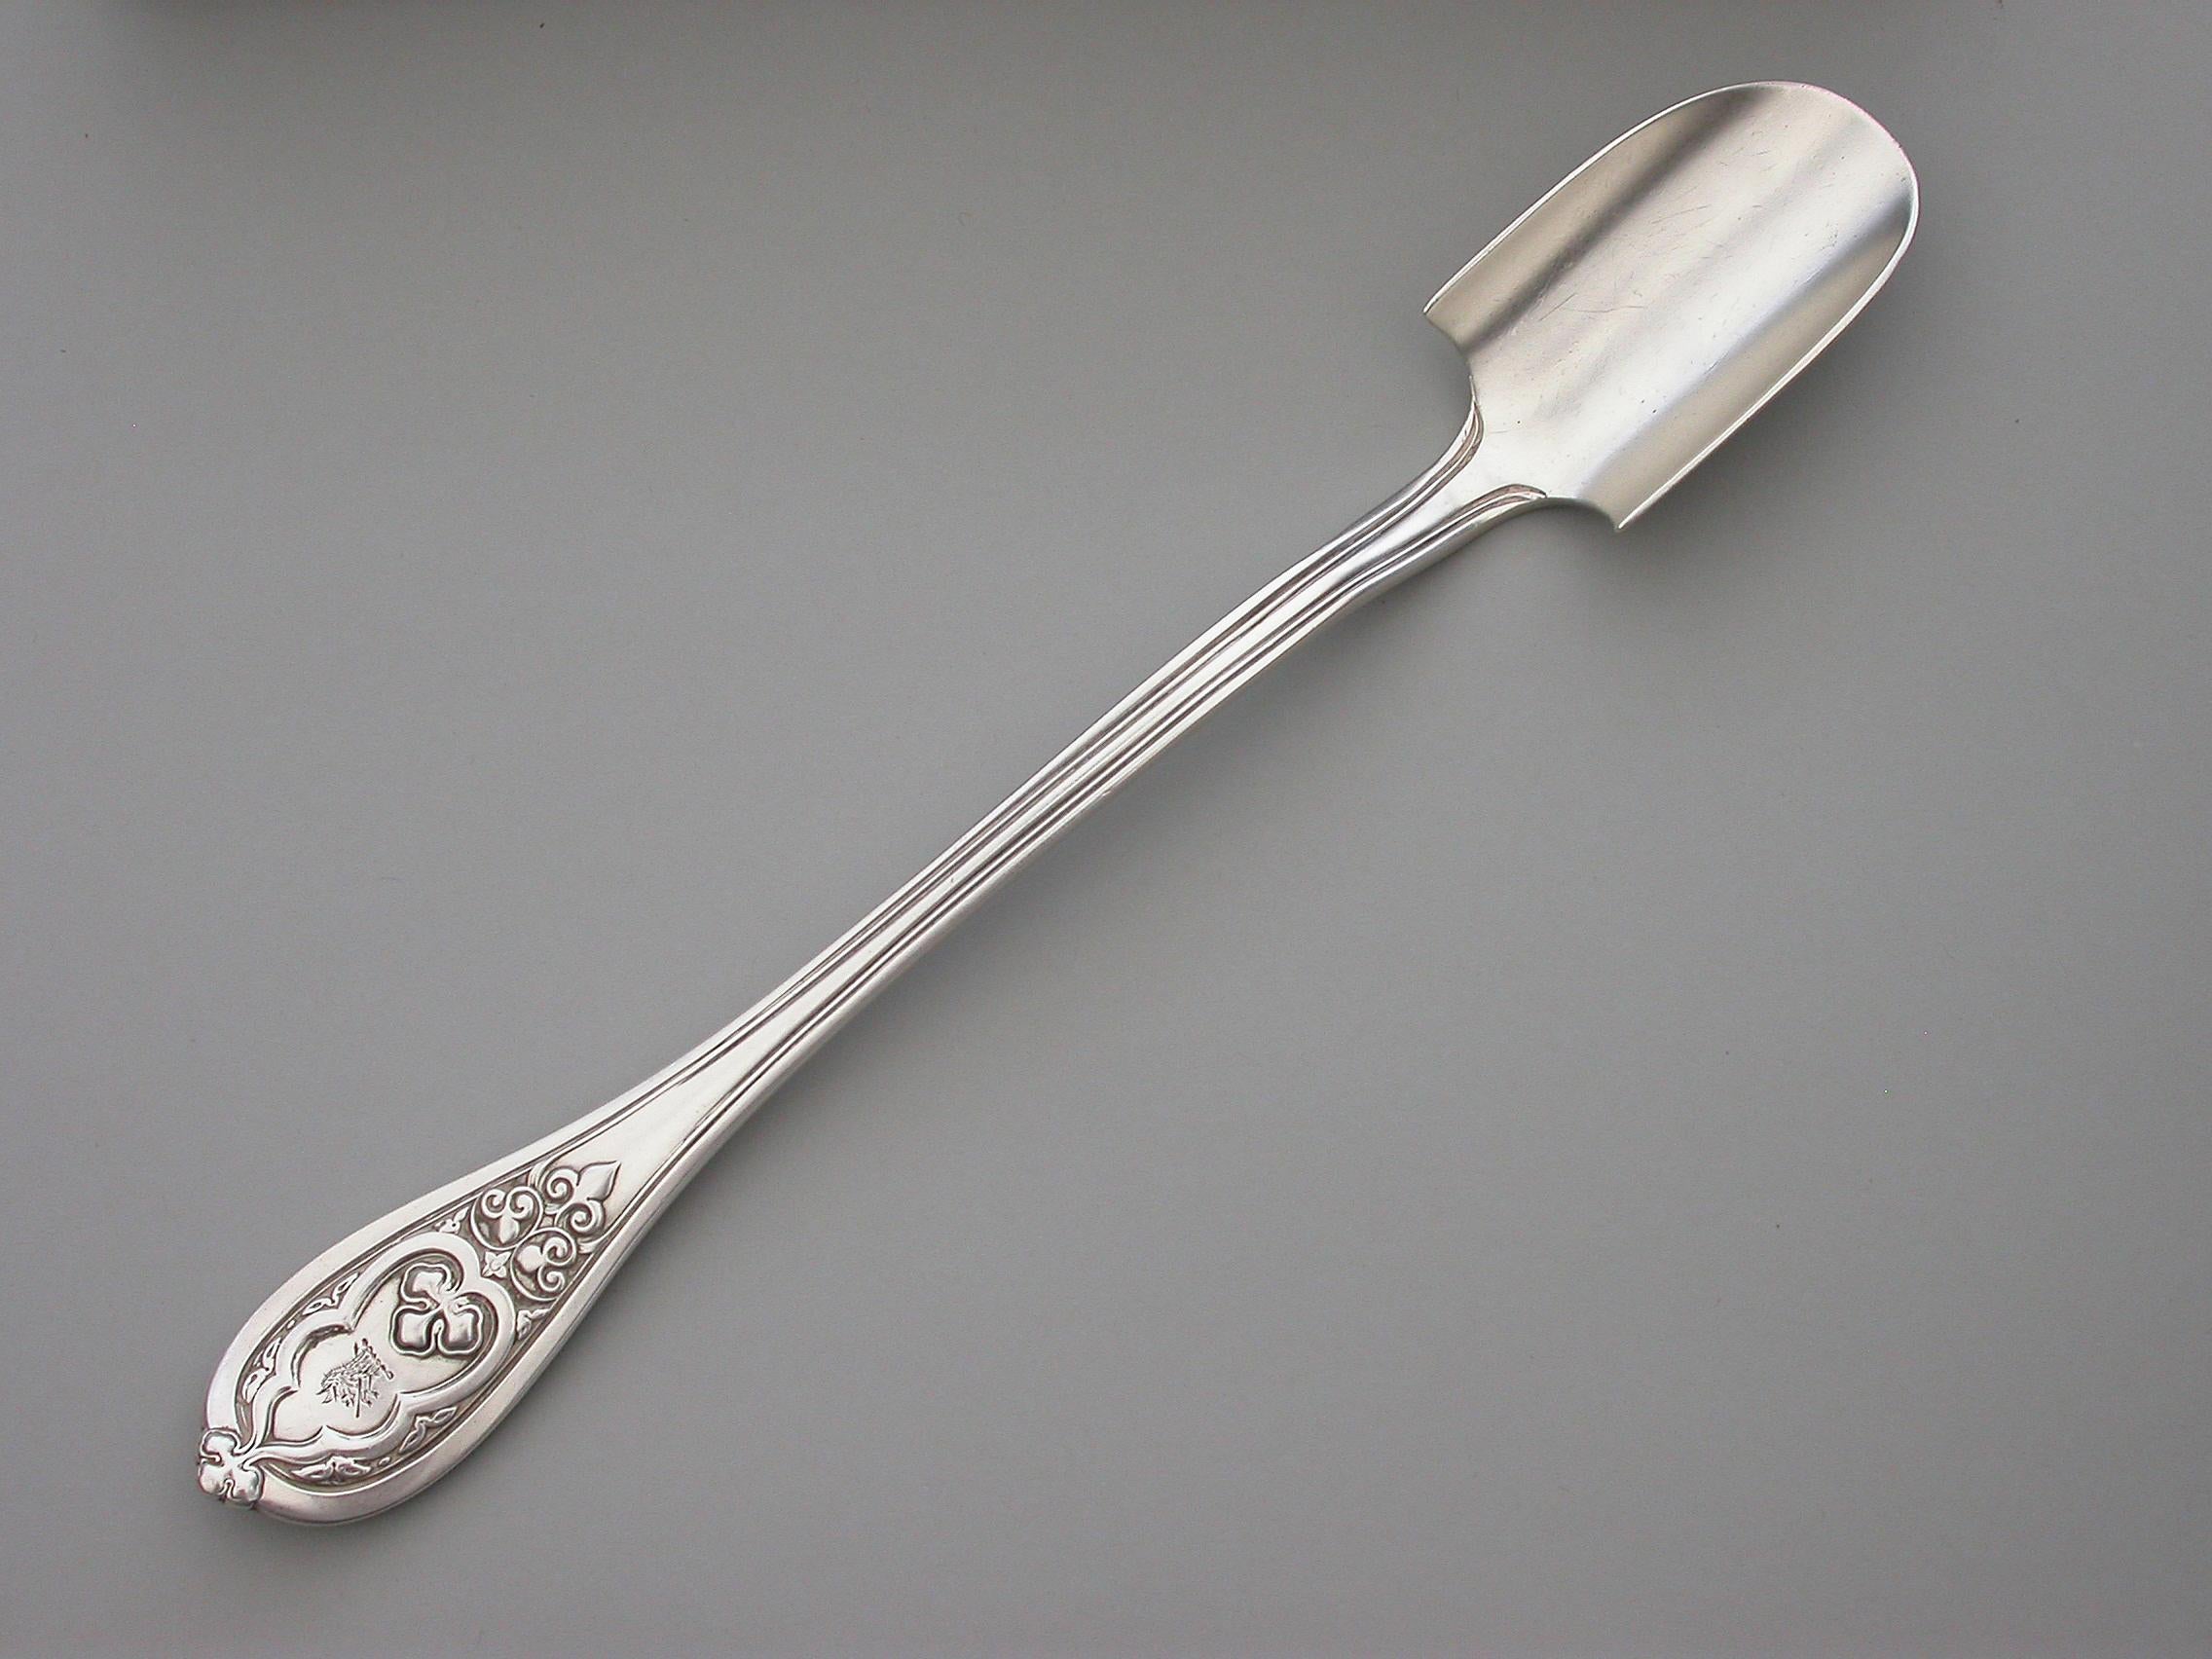 A good quality and very heavy gauge Victorian silver Stilton Cheese Scoop, in 'New Gothic' pattern. The terminal engraved with a crest.

By George Adams, London 1868.

122.00 grams (3.92 troy ounces).